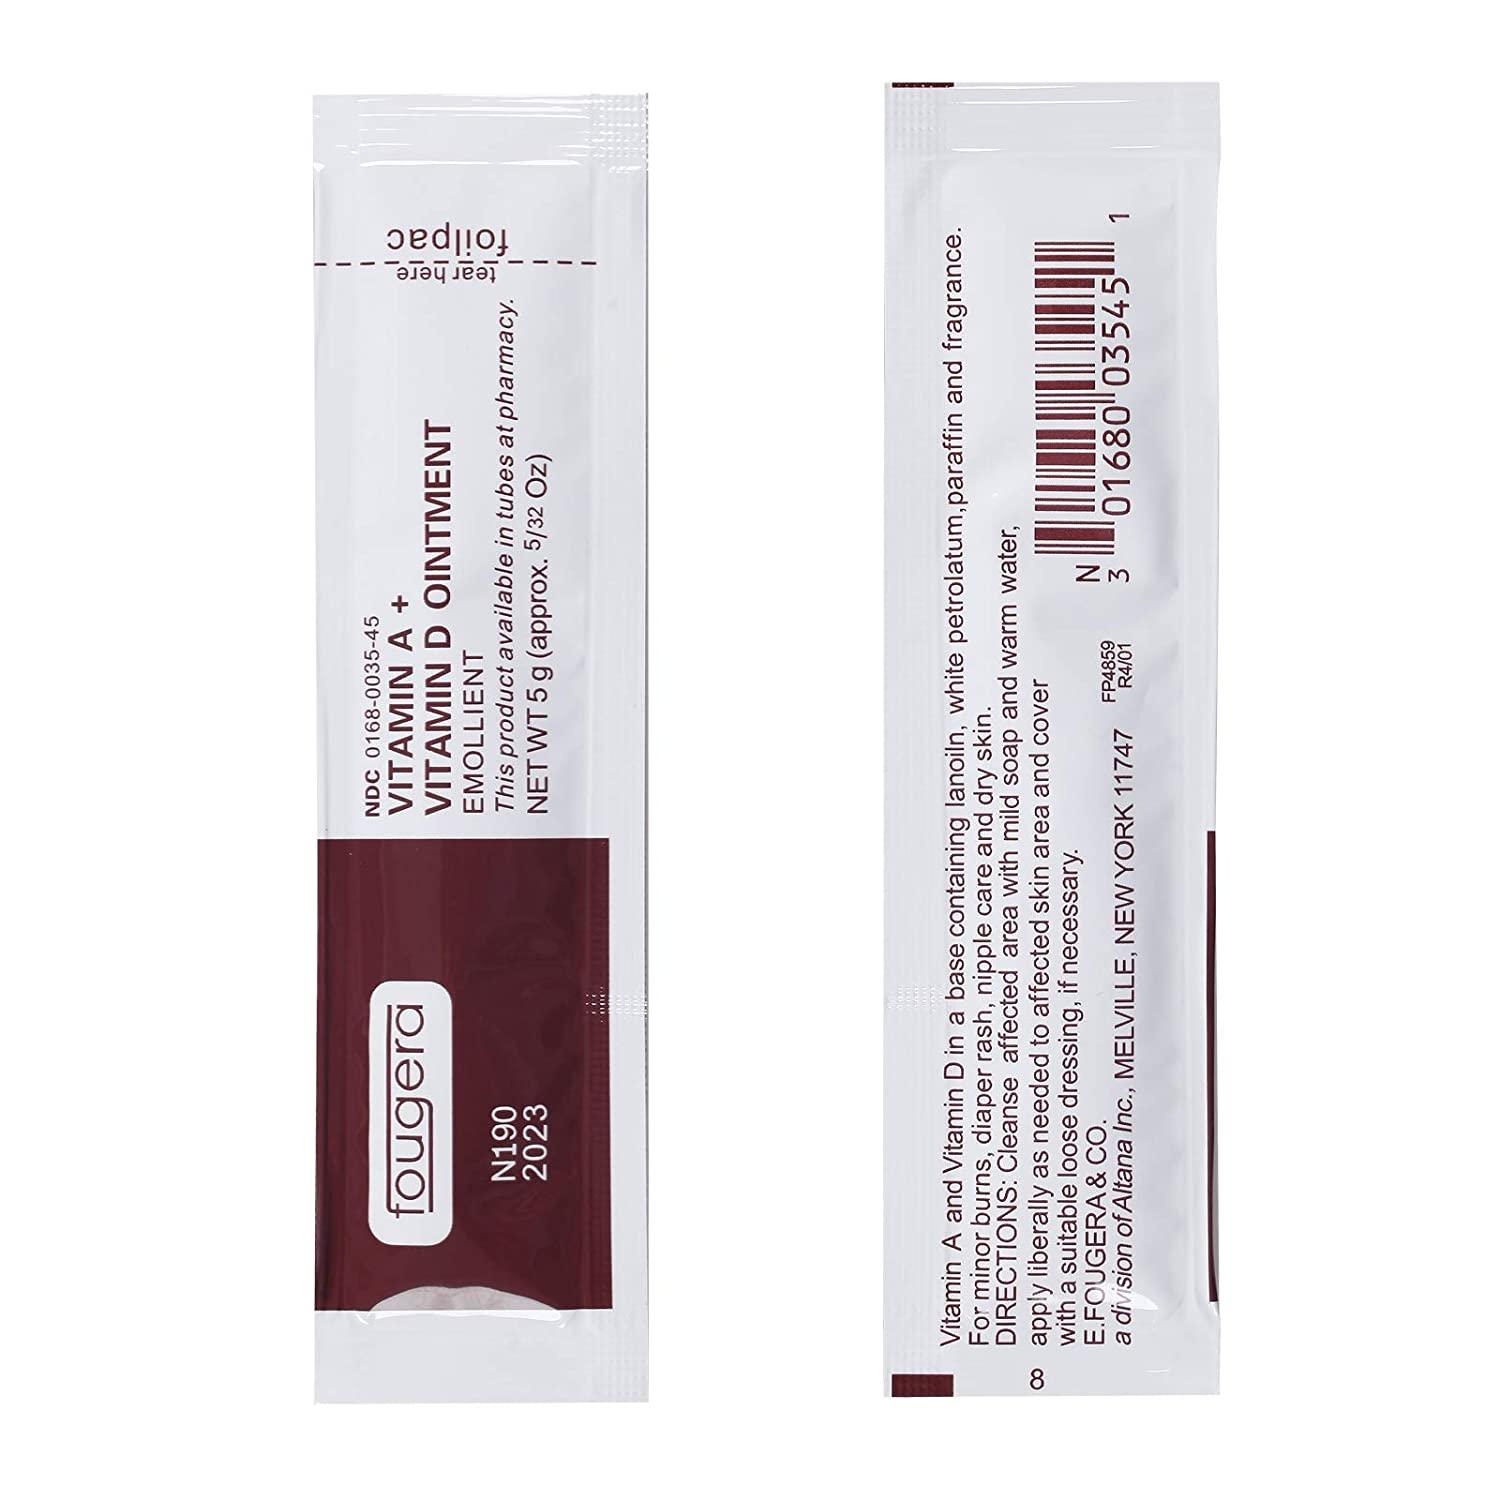 Mumbai Tattoo VITAMIN A E D Ointment During & After Tattooing 1pic 10 gm  Tattoo Ink Price in India - Buy Mumbai Tattoo VITAMIN A E D Ointment During  & After Tattooing